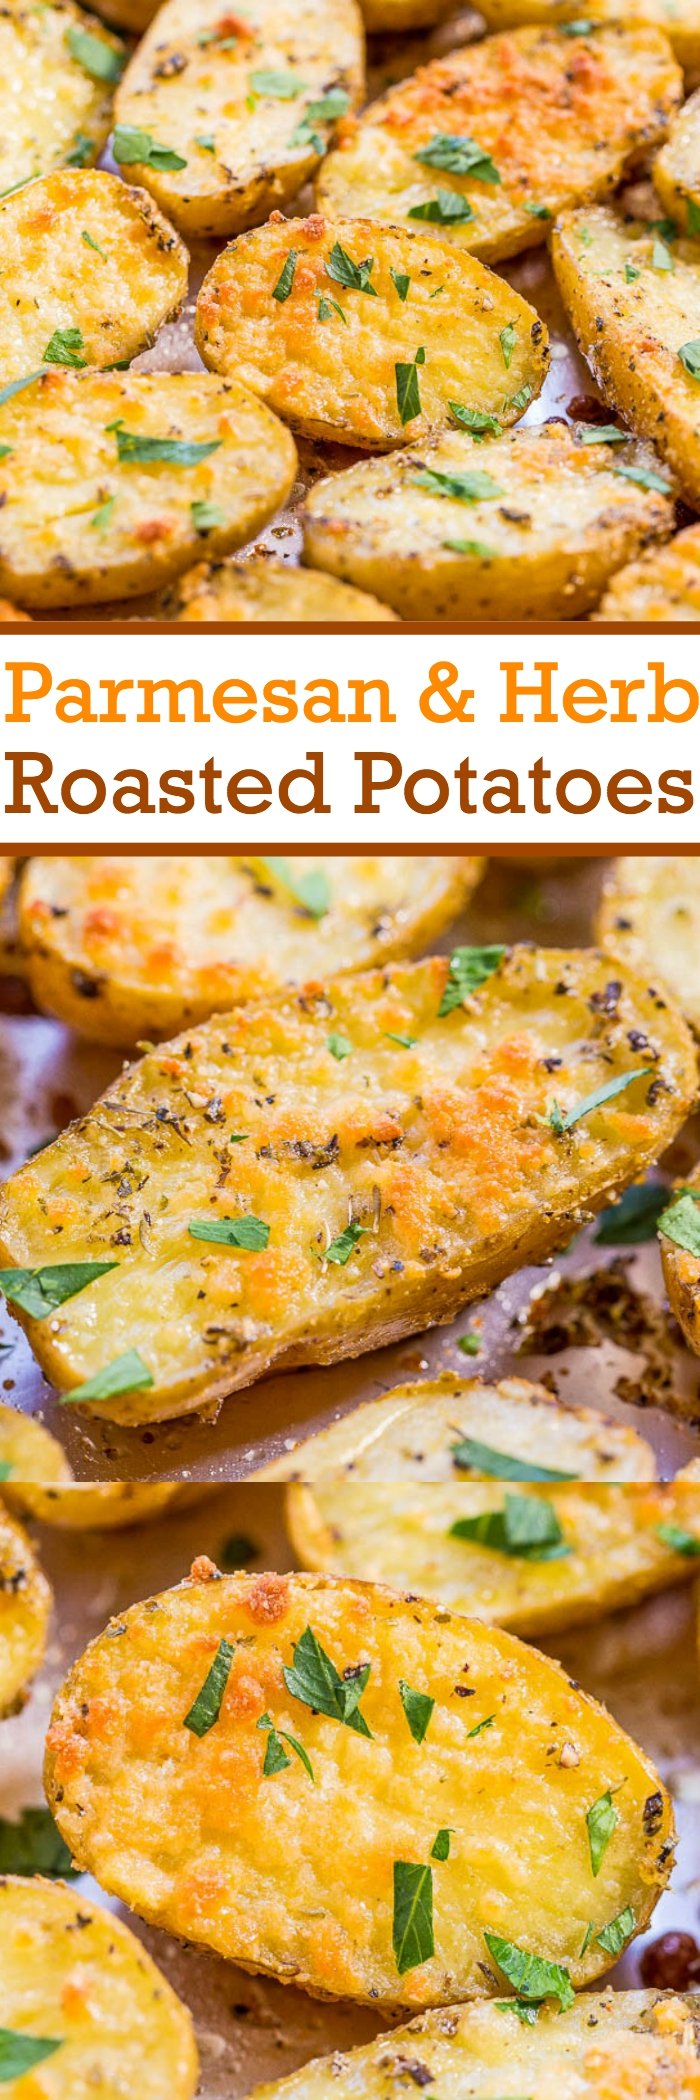 Parmesan and Herb Roasted Potatoes - Easiest potatoes ever and packed with so much flavor! Olive oil, herbs, and everything is better with CHEESE!! A family favorite that everyone loves!